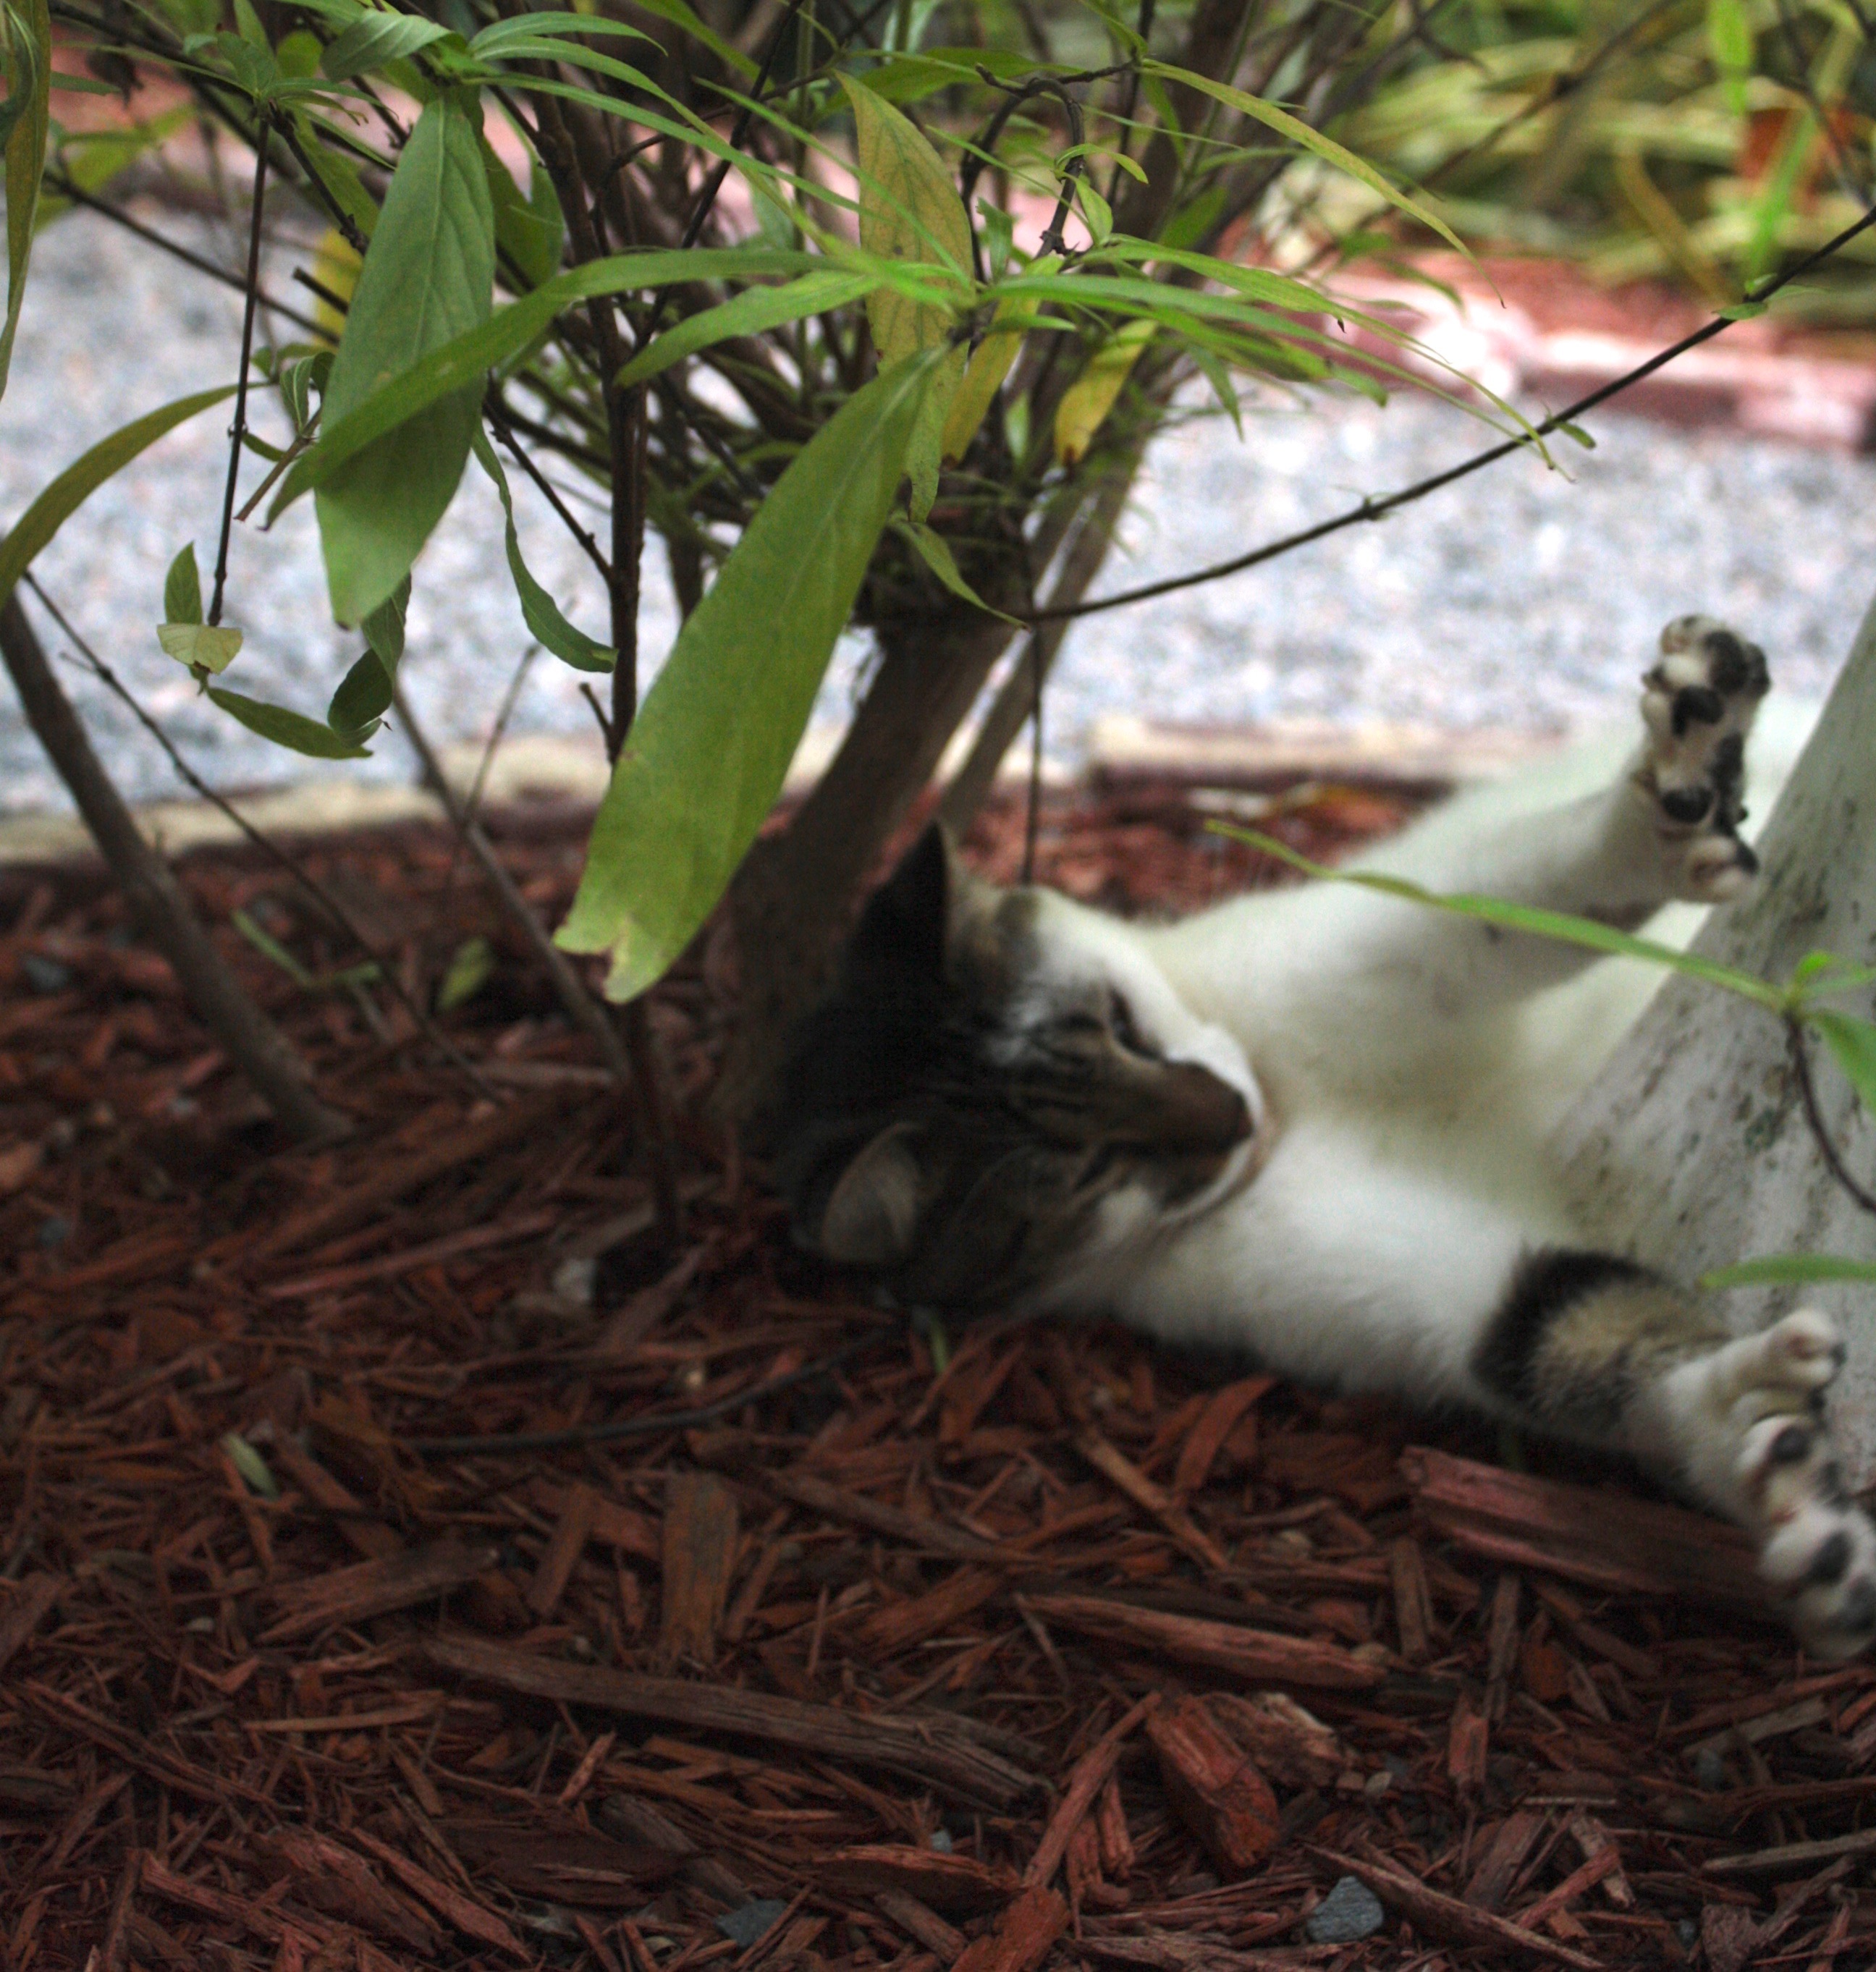 One of around 50 polydactyl cats that live at Hemingway's home, descendants of the author's cat, Snowball.